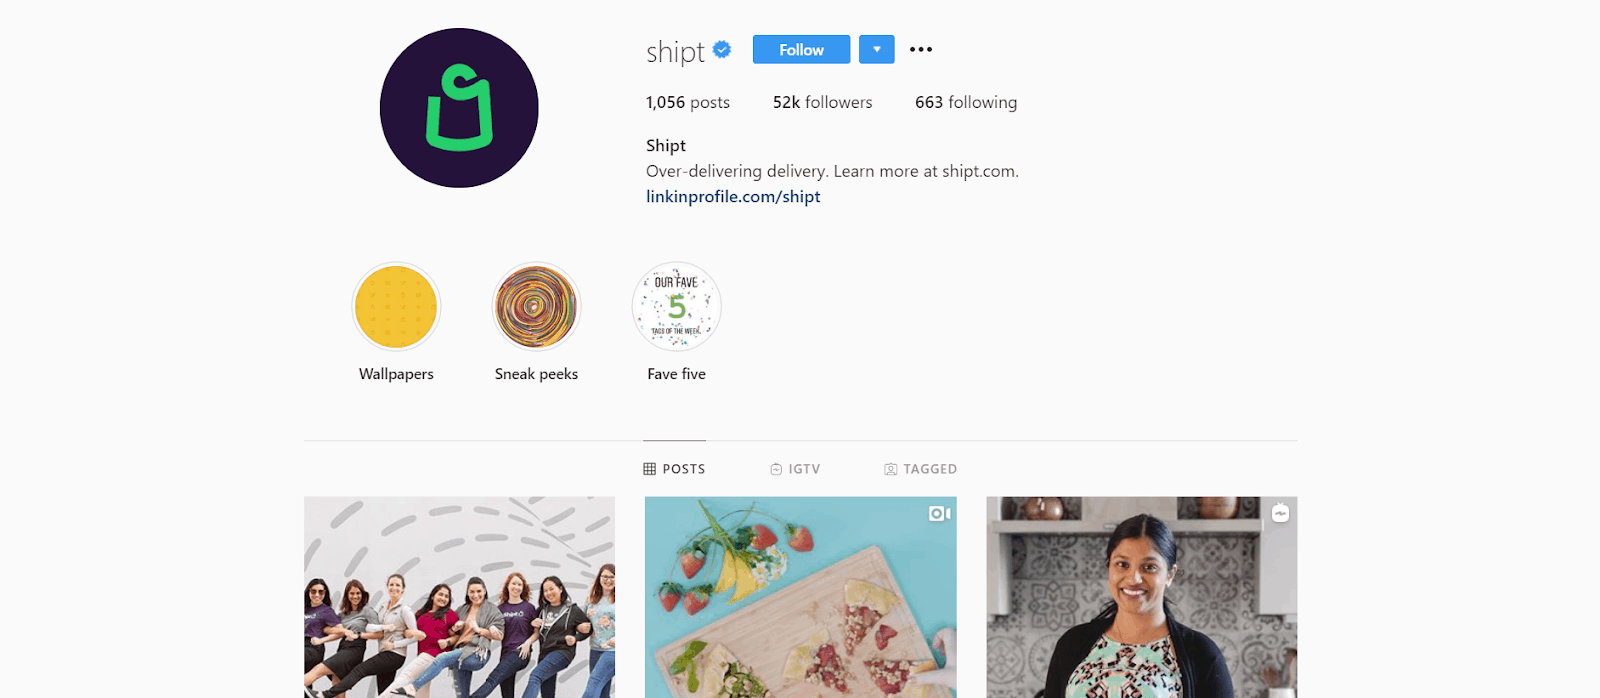 Shipt's instagram page